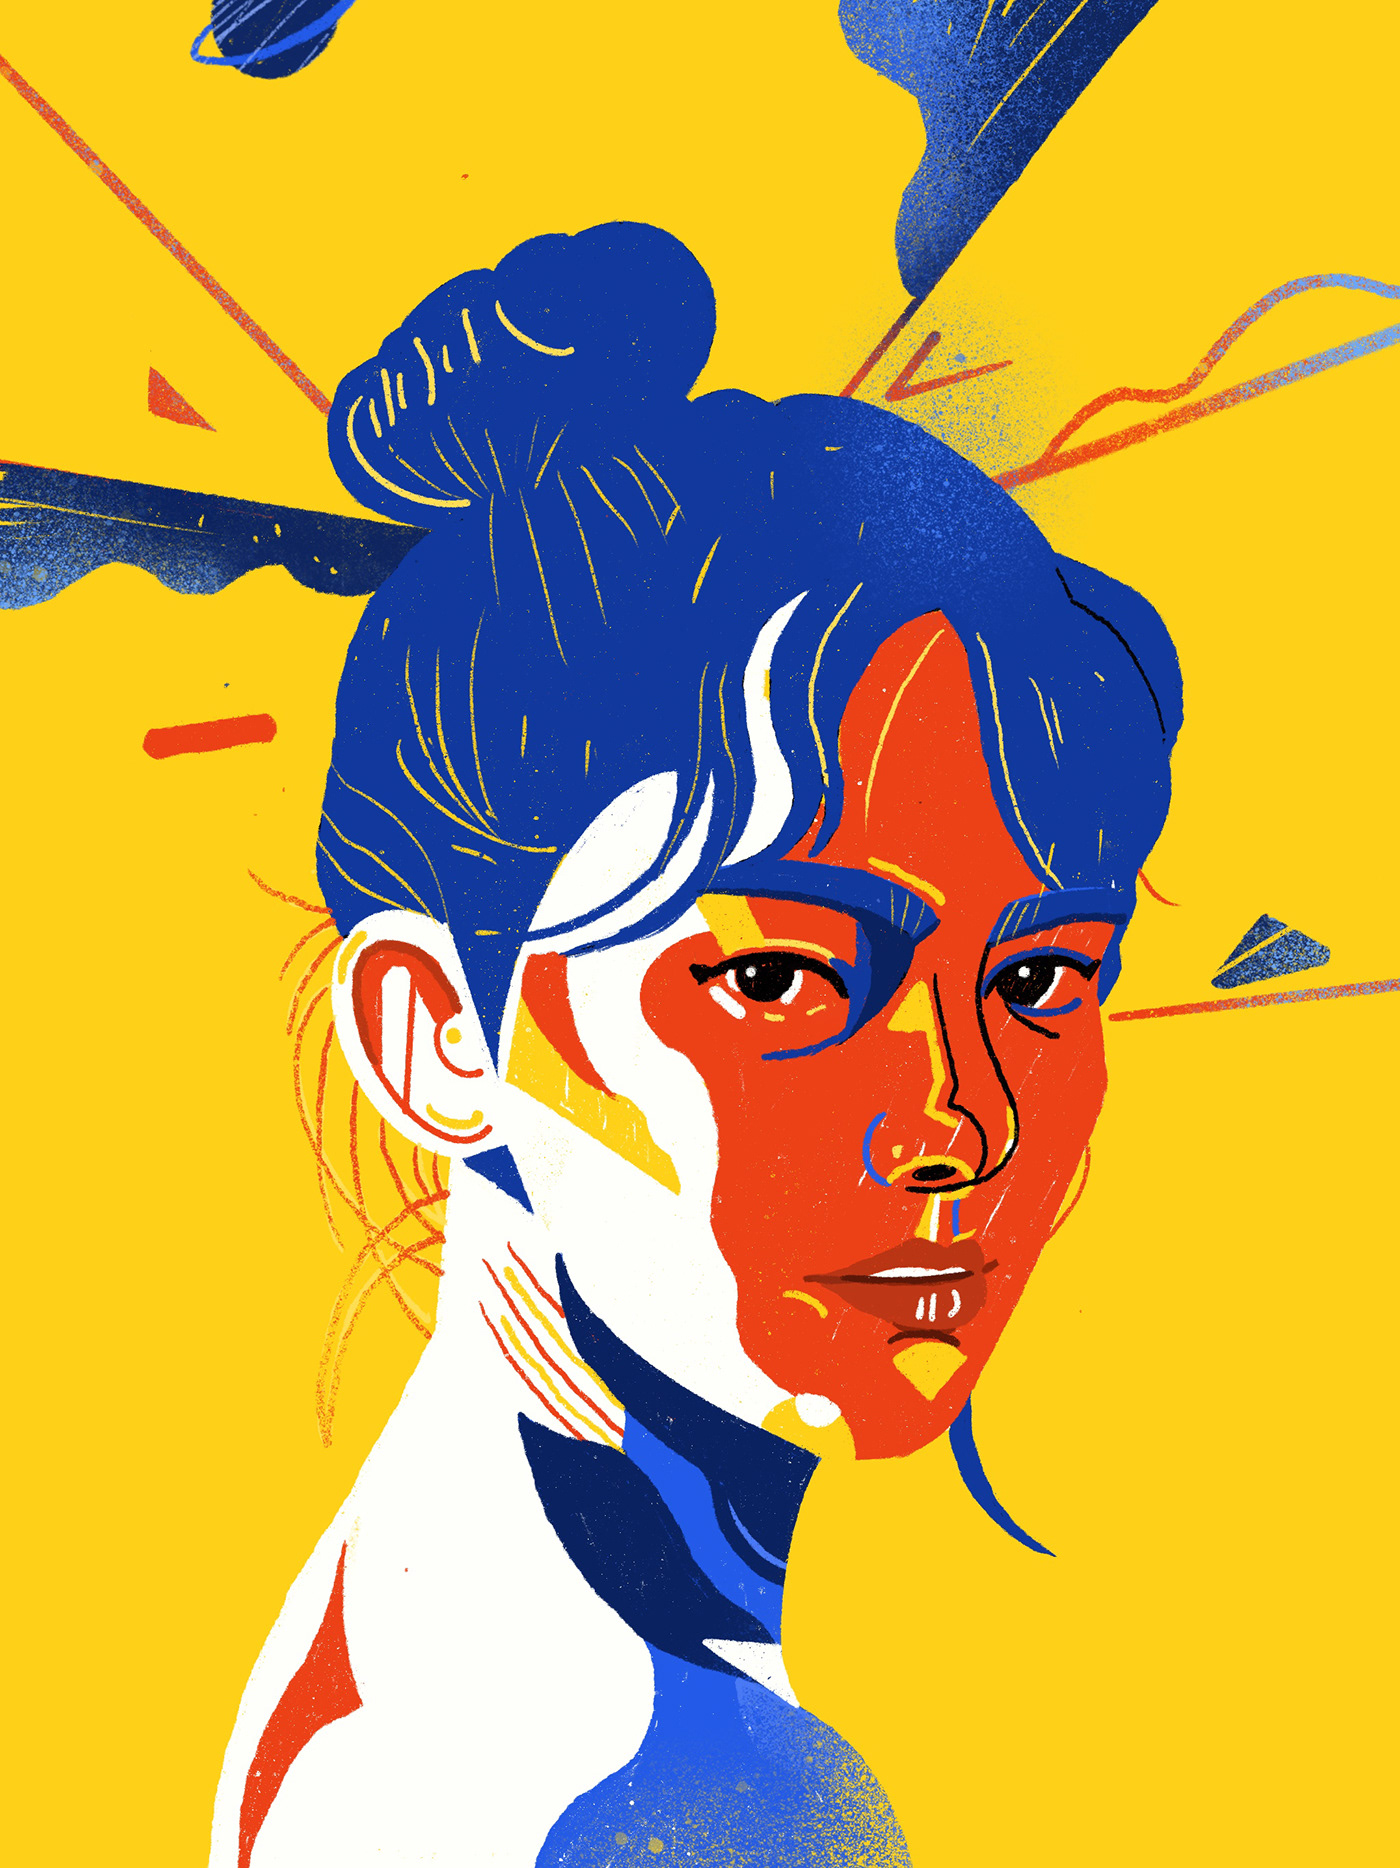 Illustrated Portraits - New Style on Behance